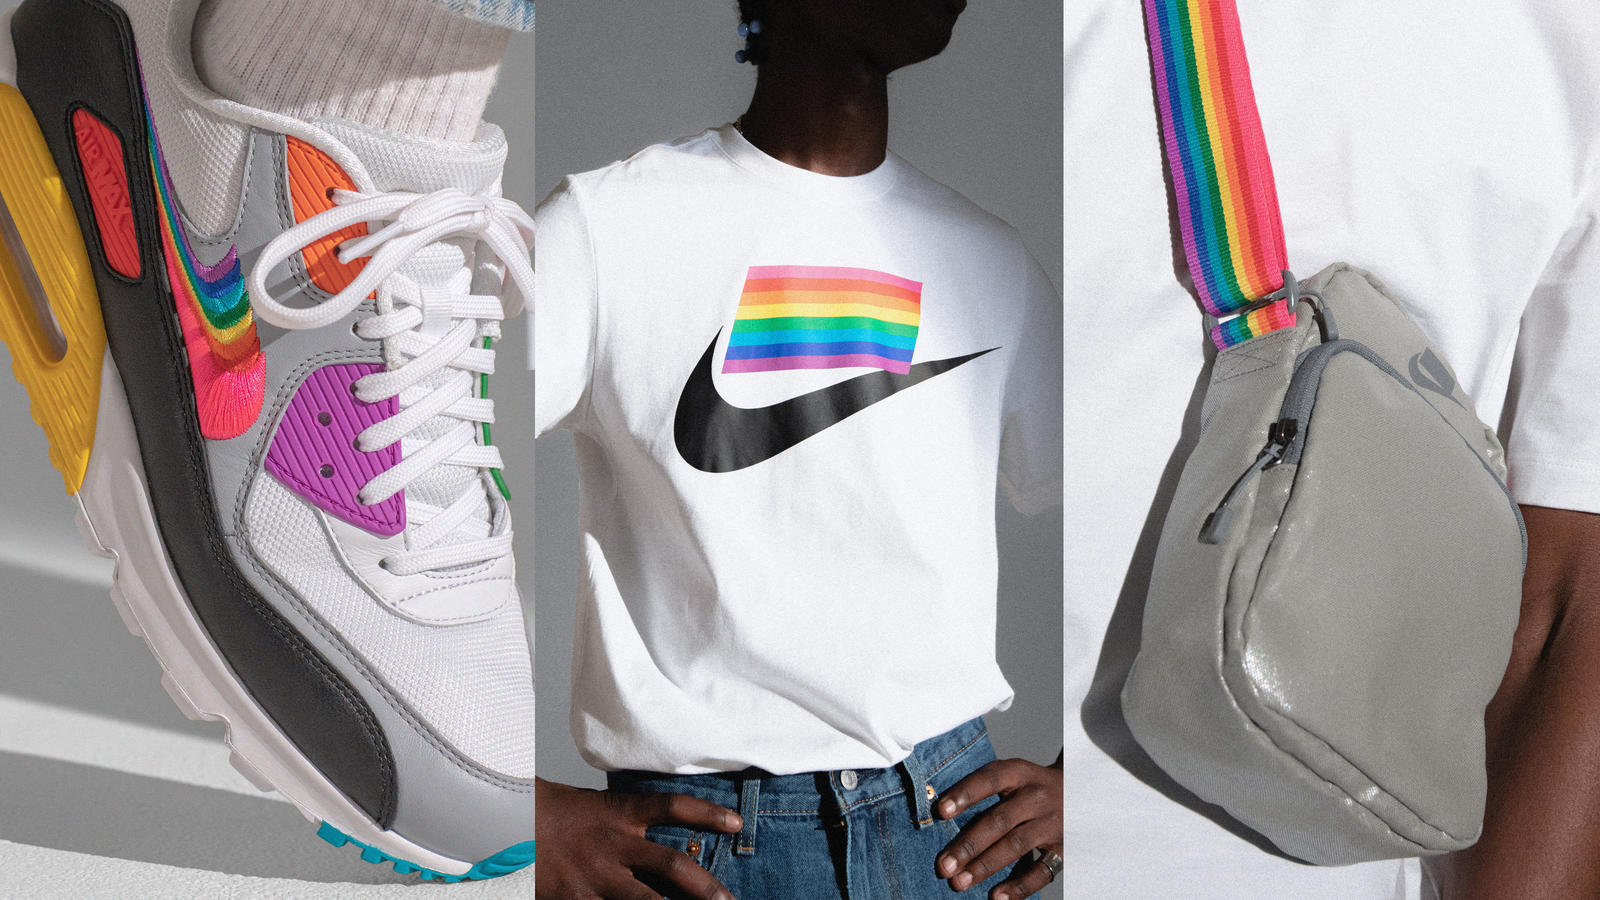 where to buy gay pride clothing near me